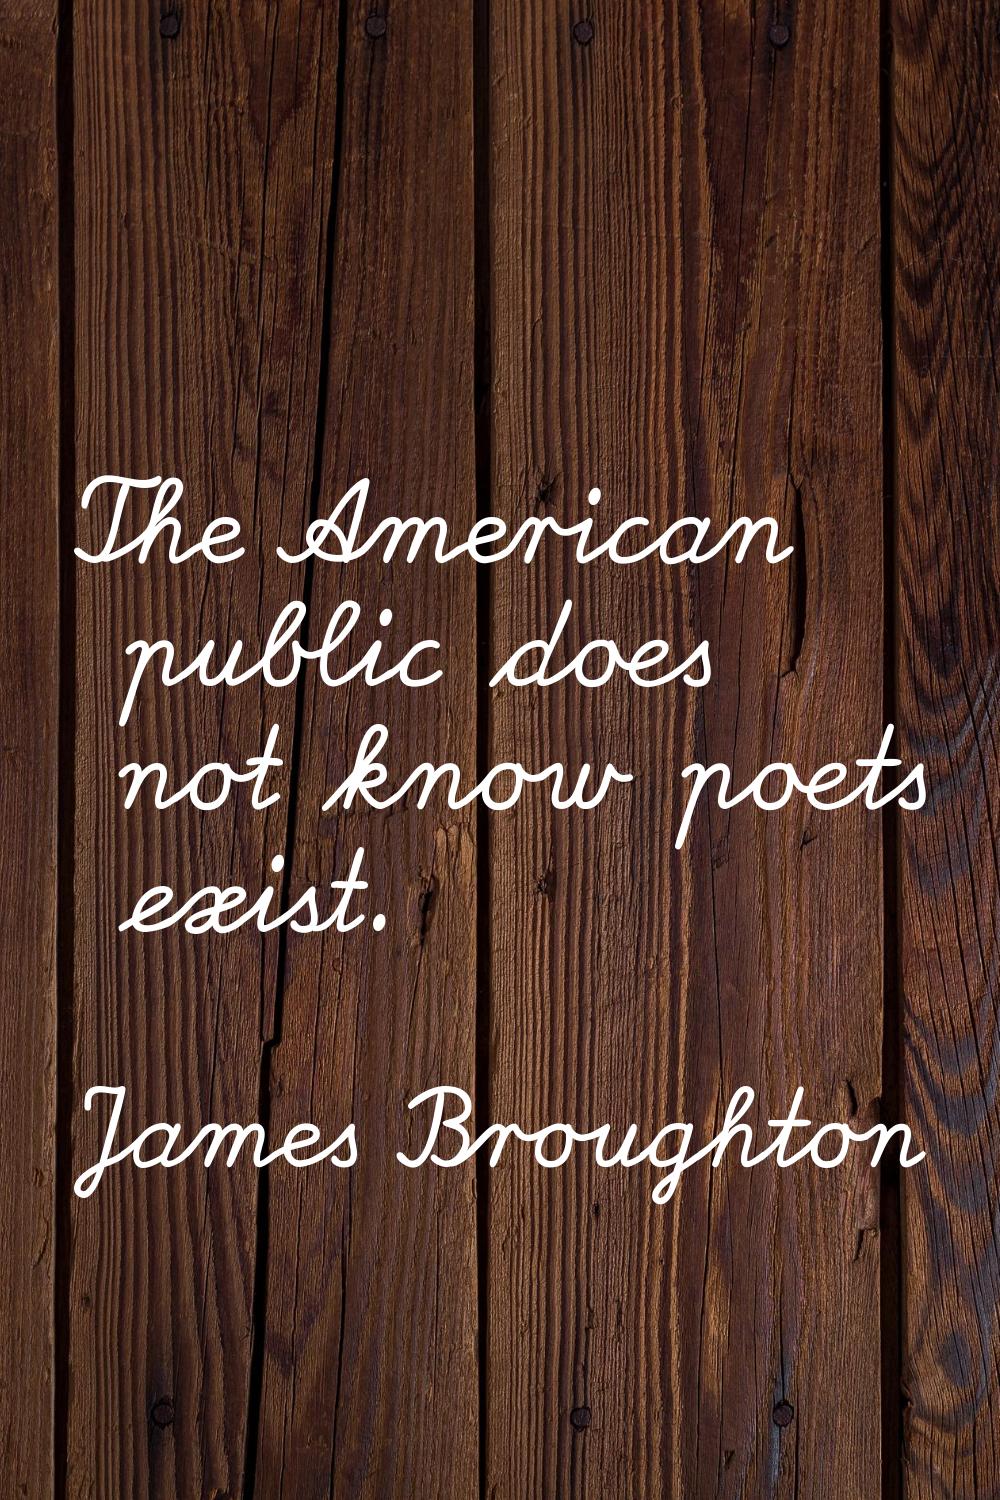 The American public does not know poets exist.